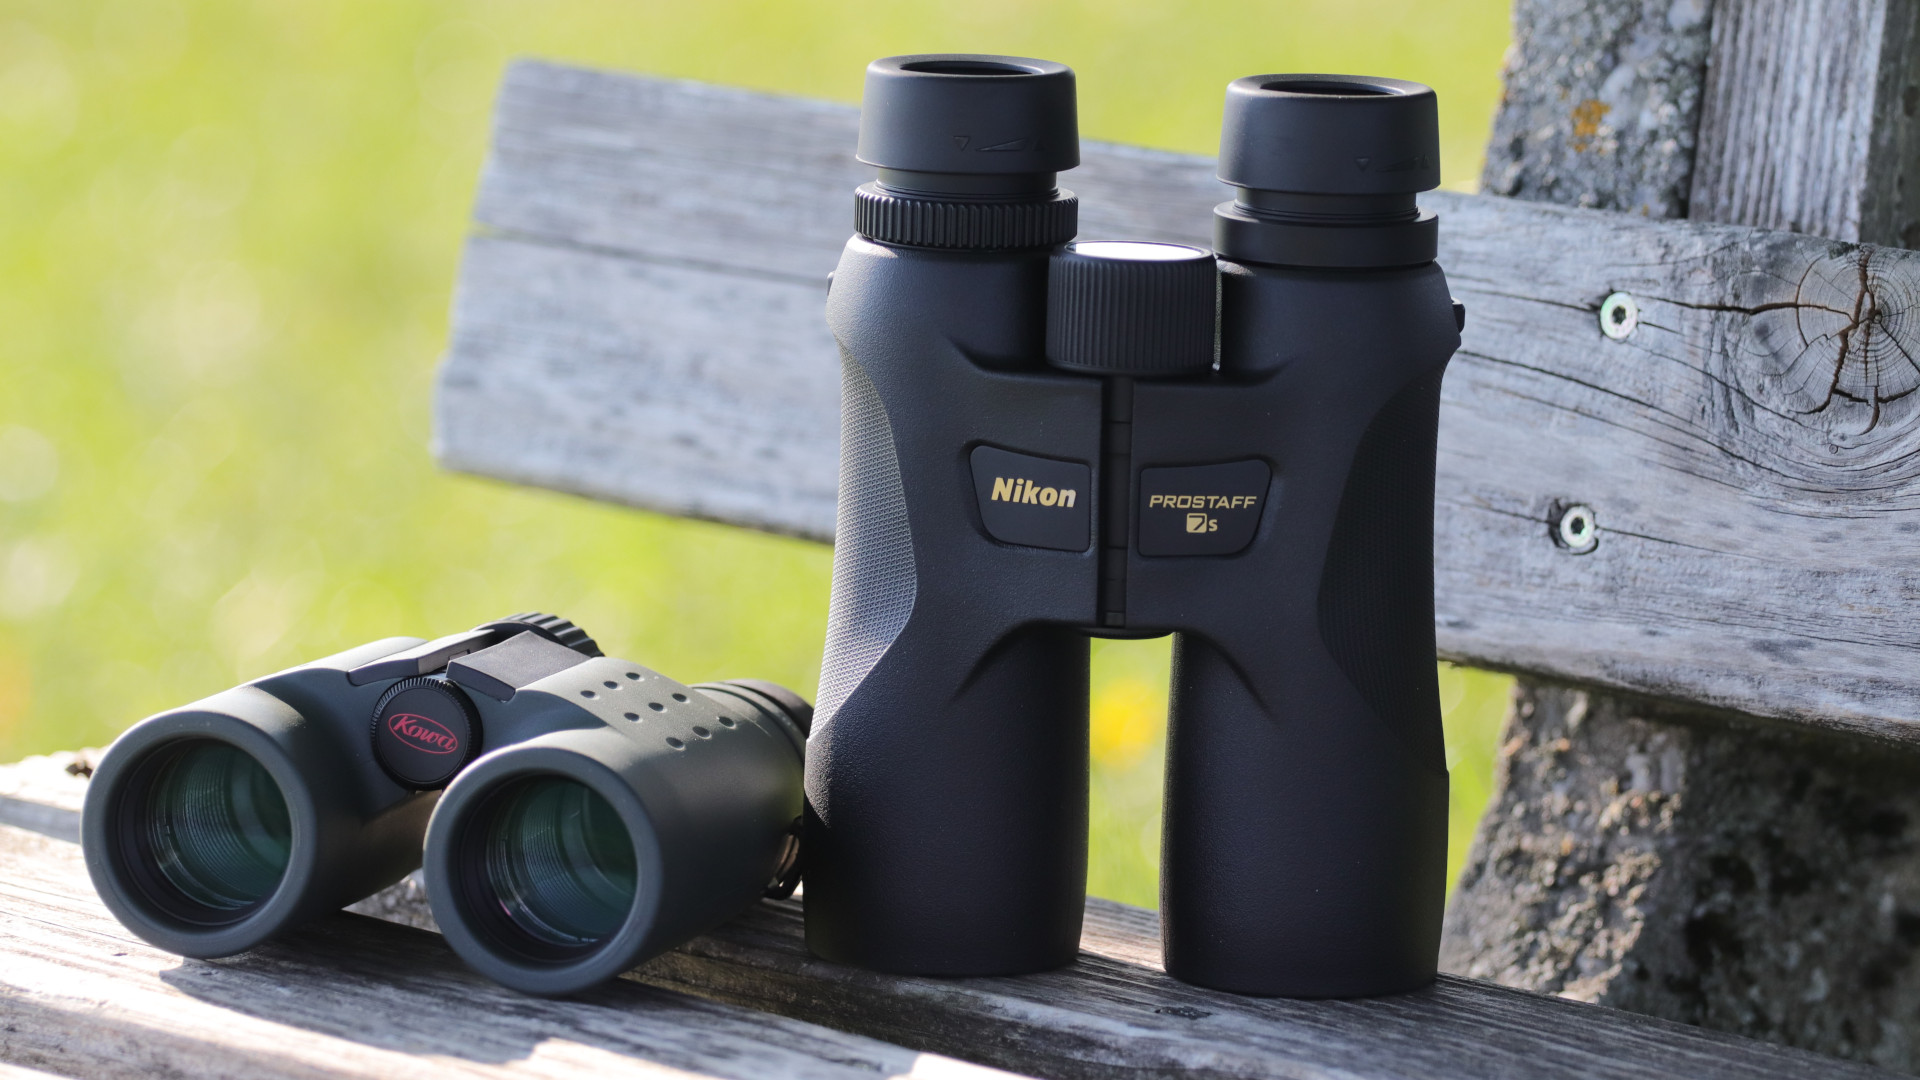 Two binoculars in the mid-price range that you will always want to have at hand